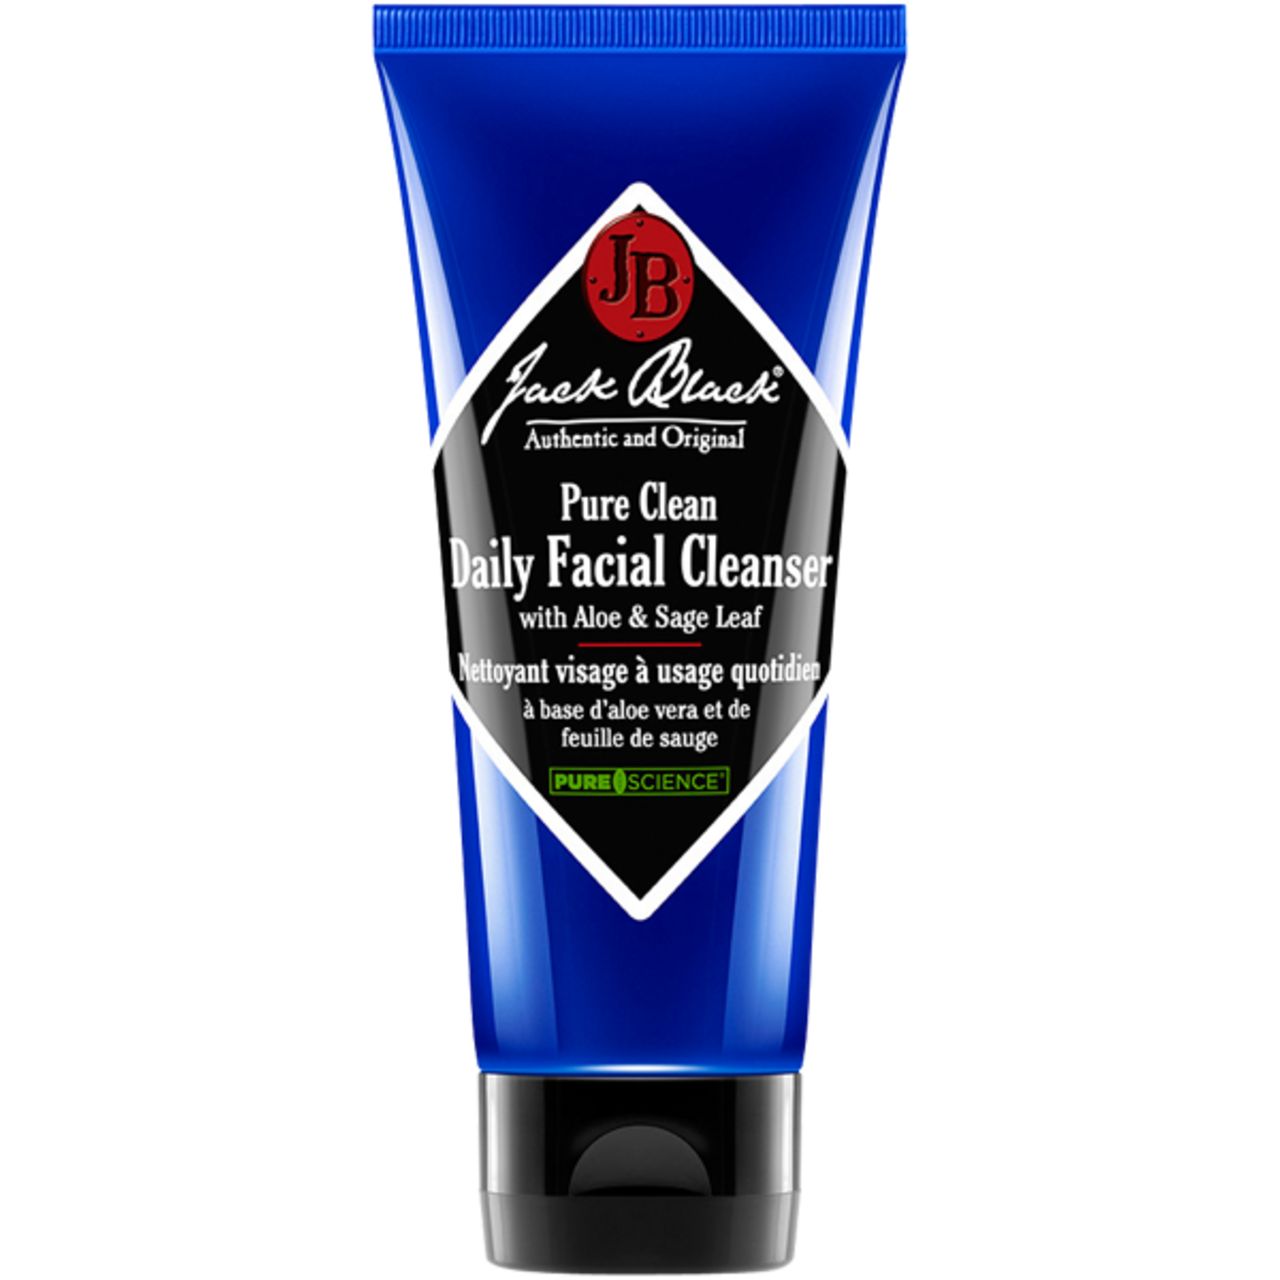 Jack Black, Pure Clean Daily Facial Cleanser